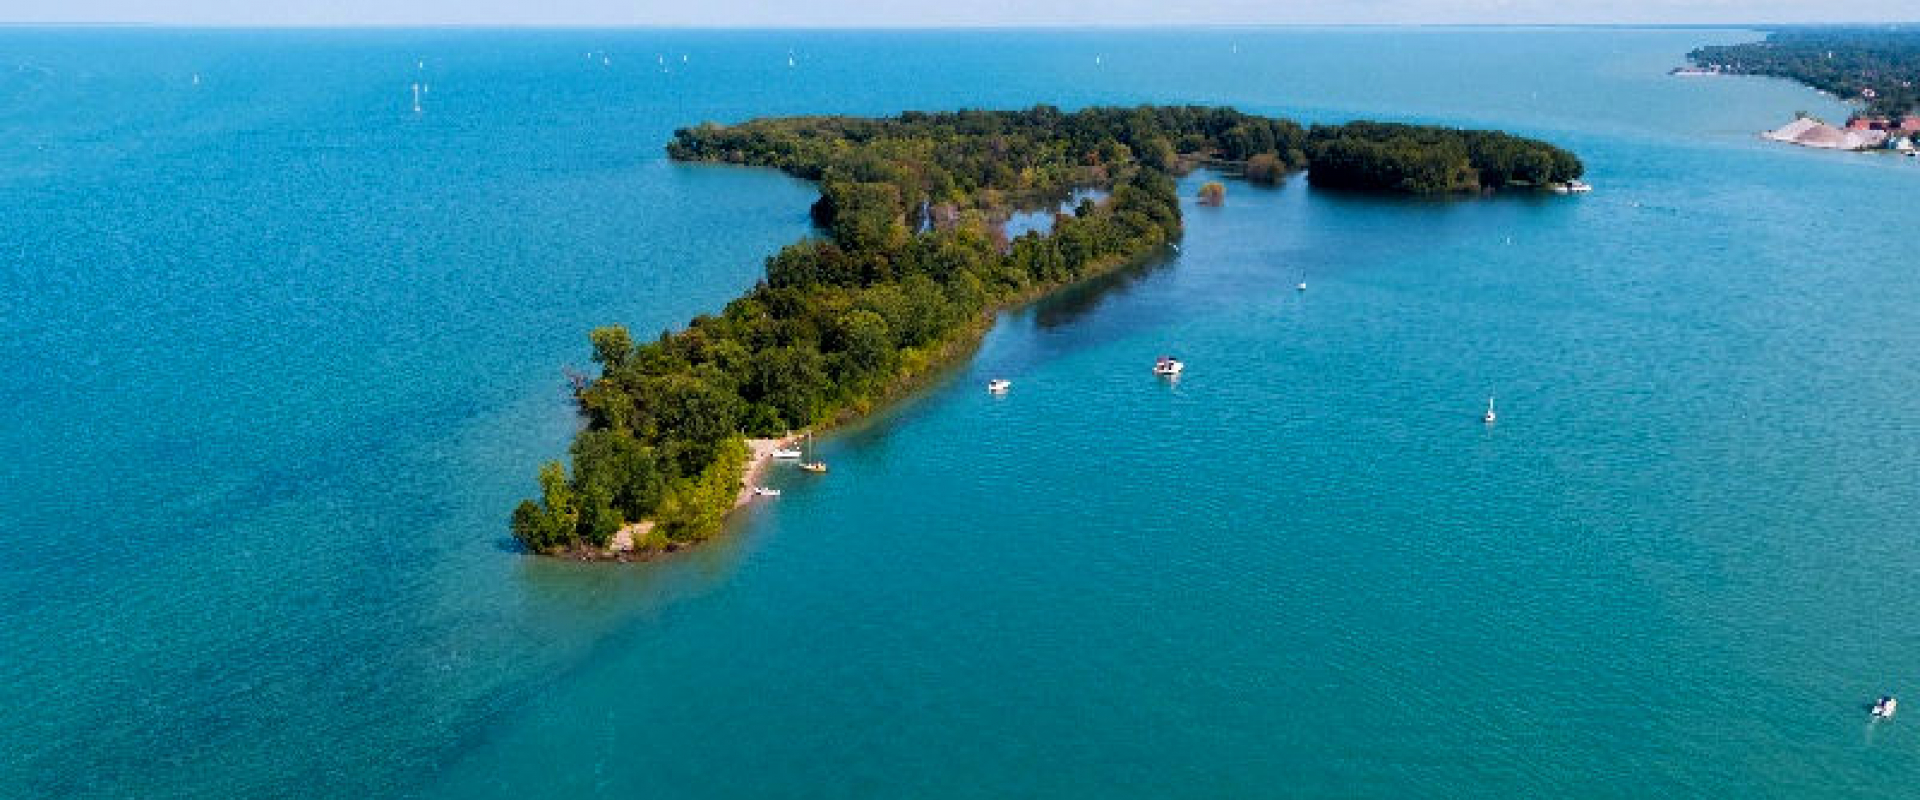 Peche Island, a small spit of land, peaks out of the blue waters of the Detroit River. 